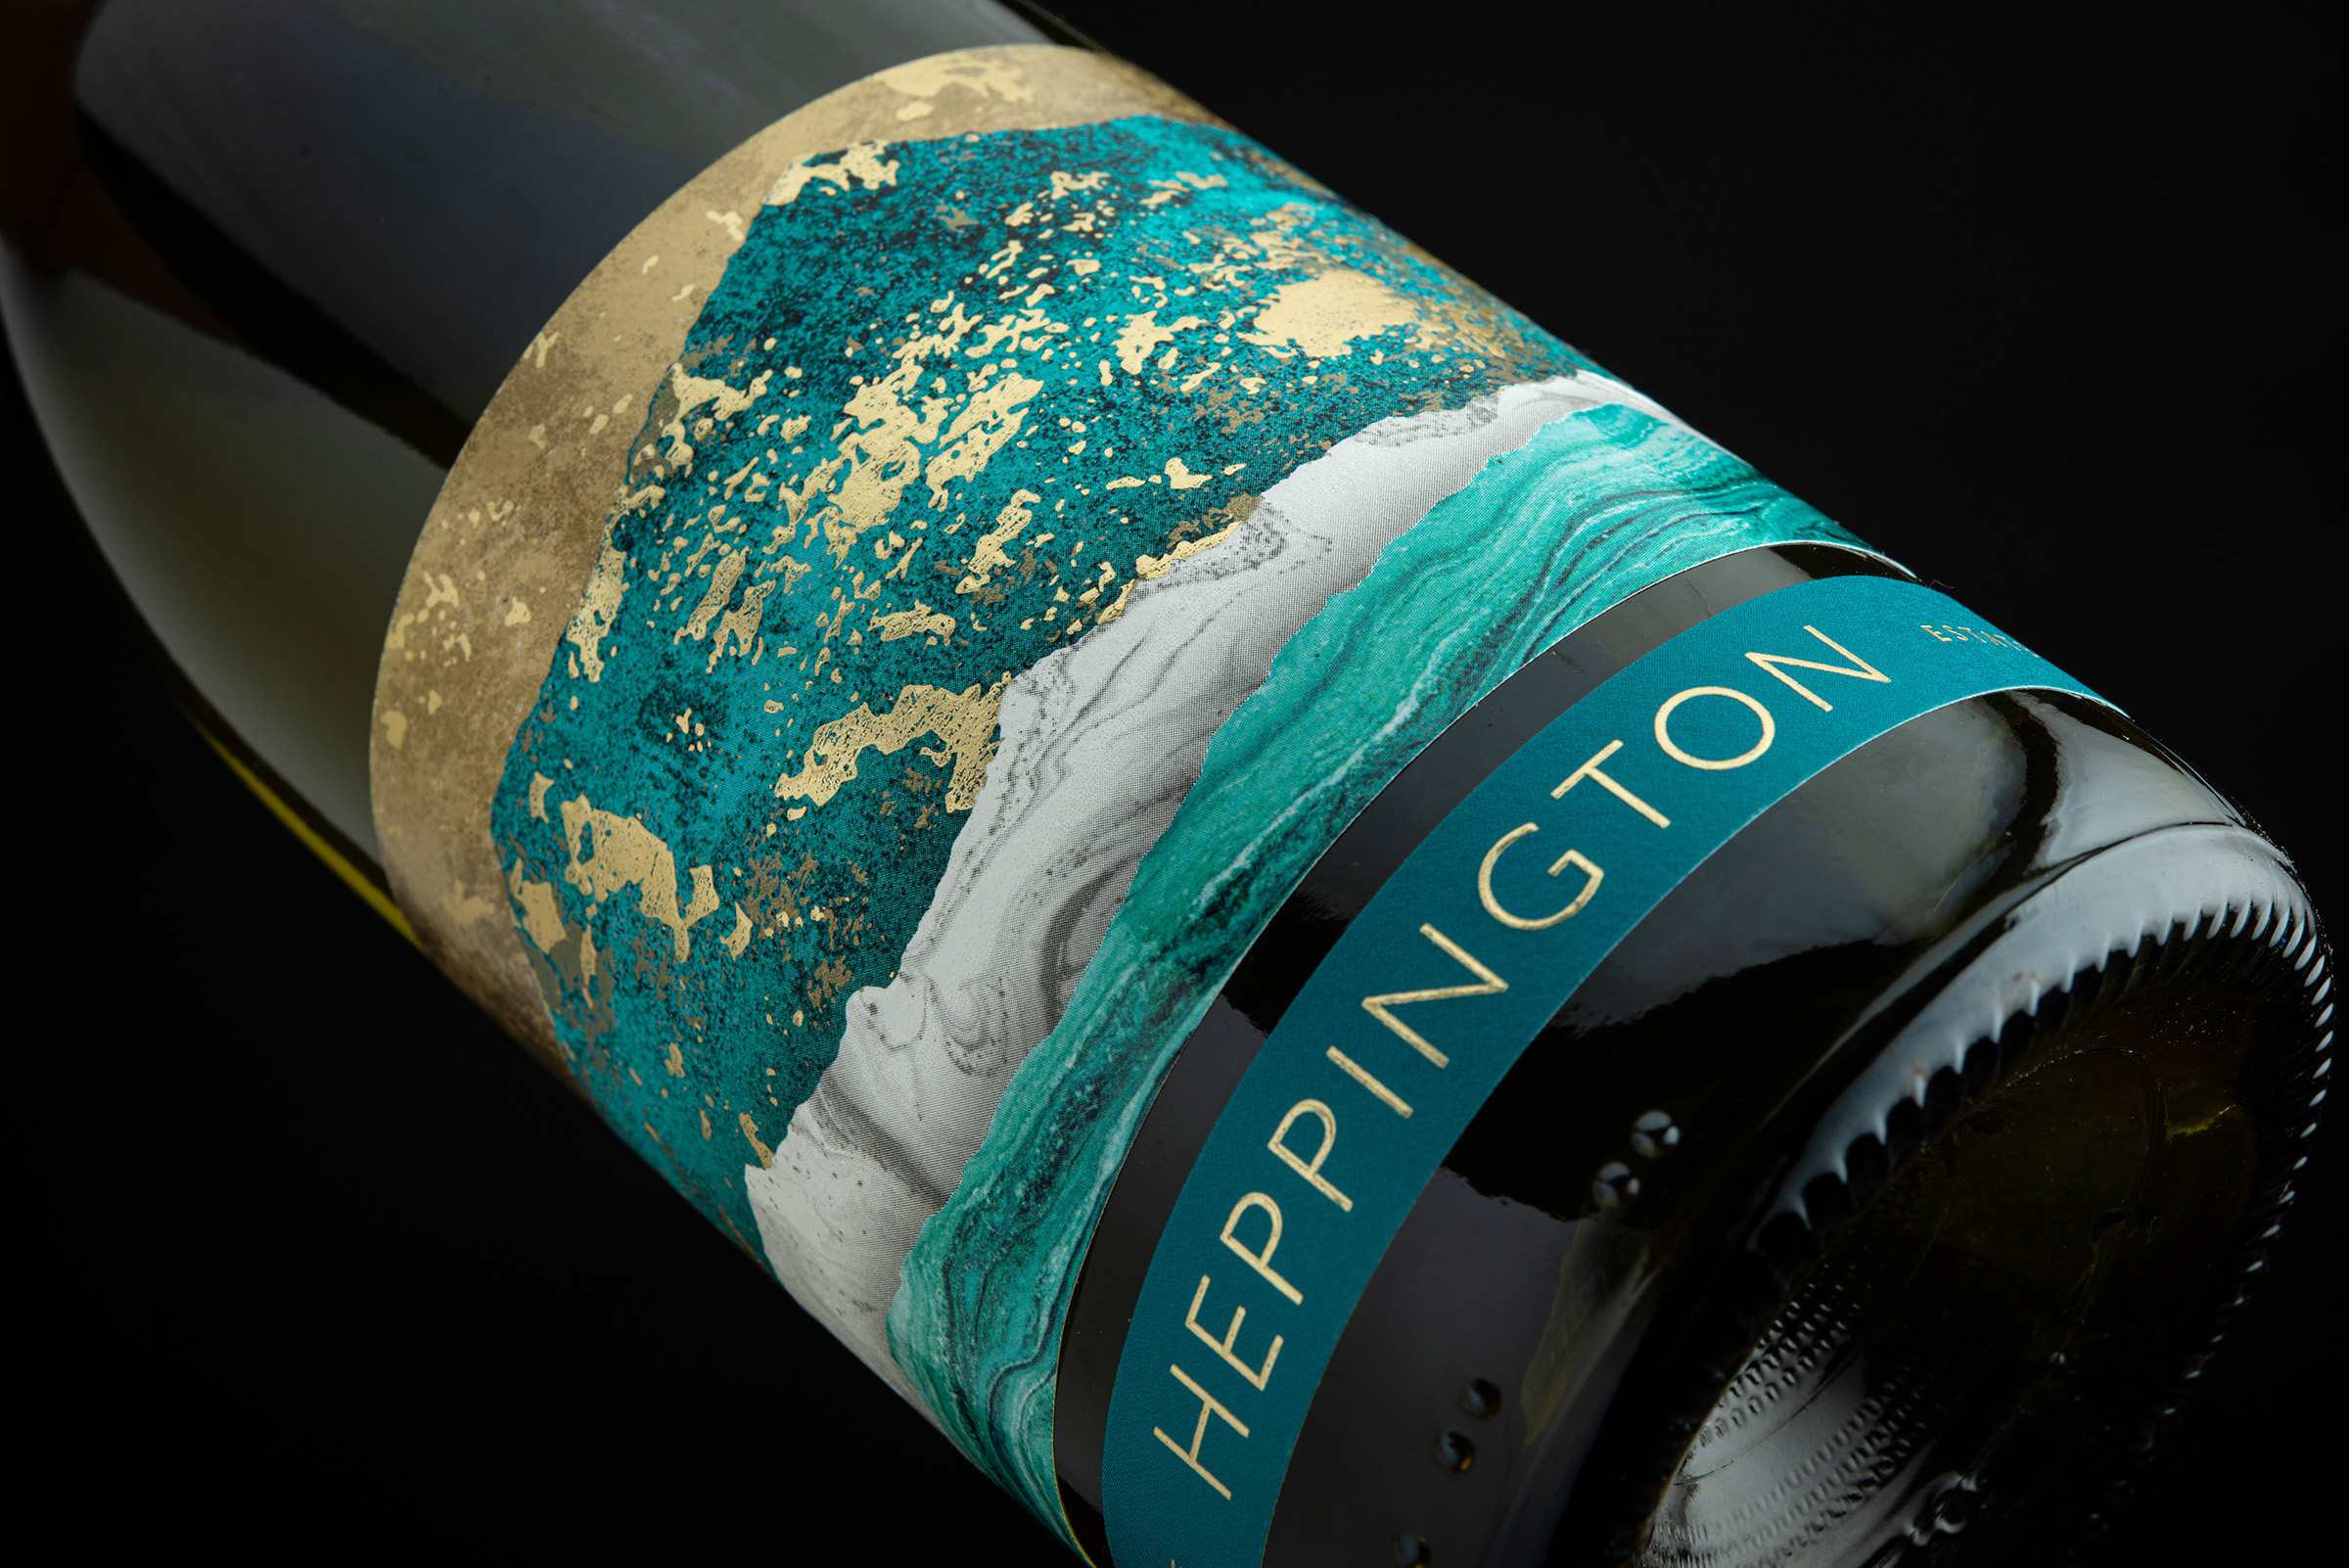 Studio Parr Branding and Packaging Design for Leading English Boutique Vineyard